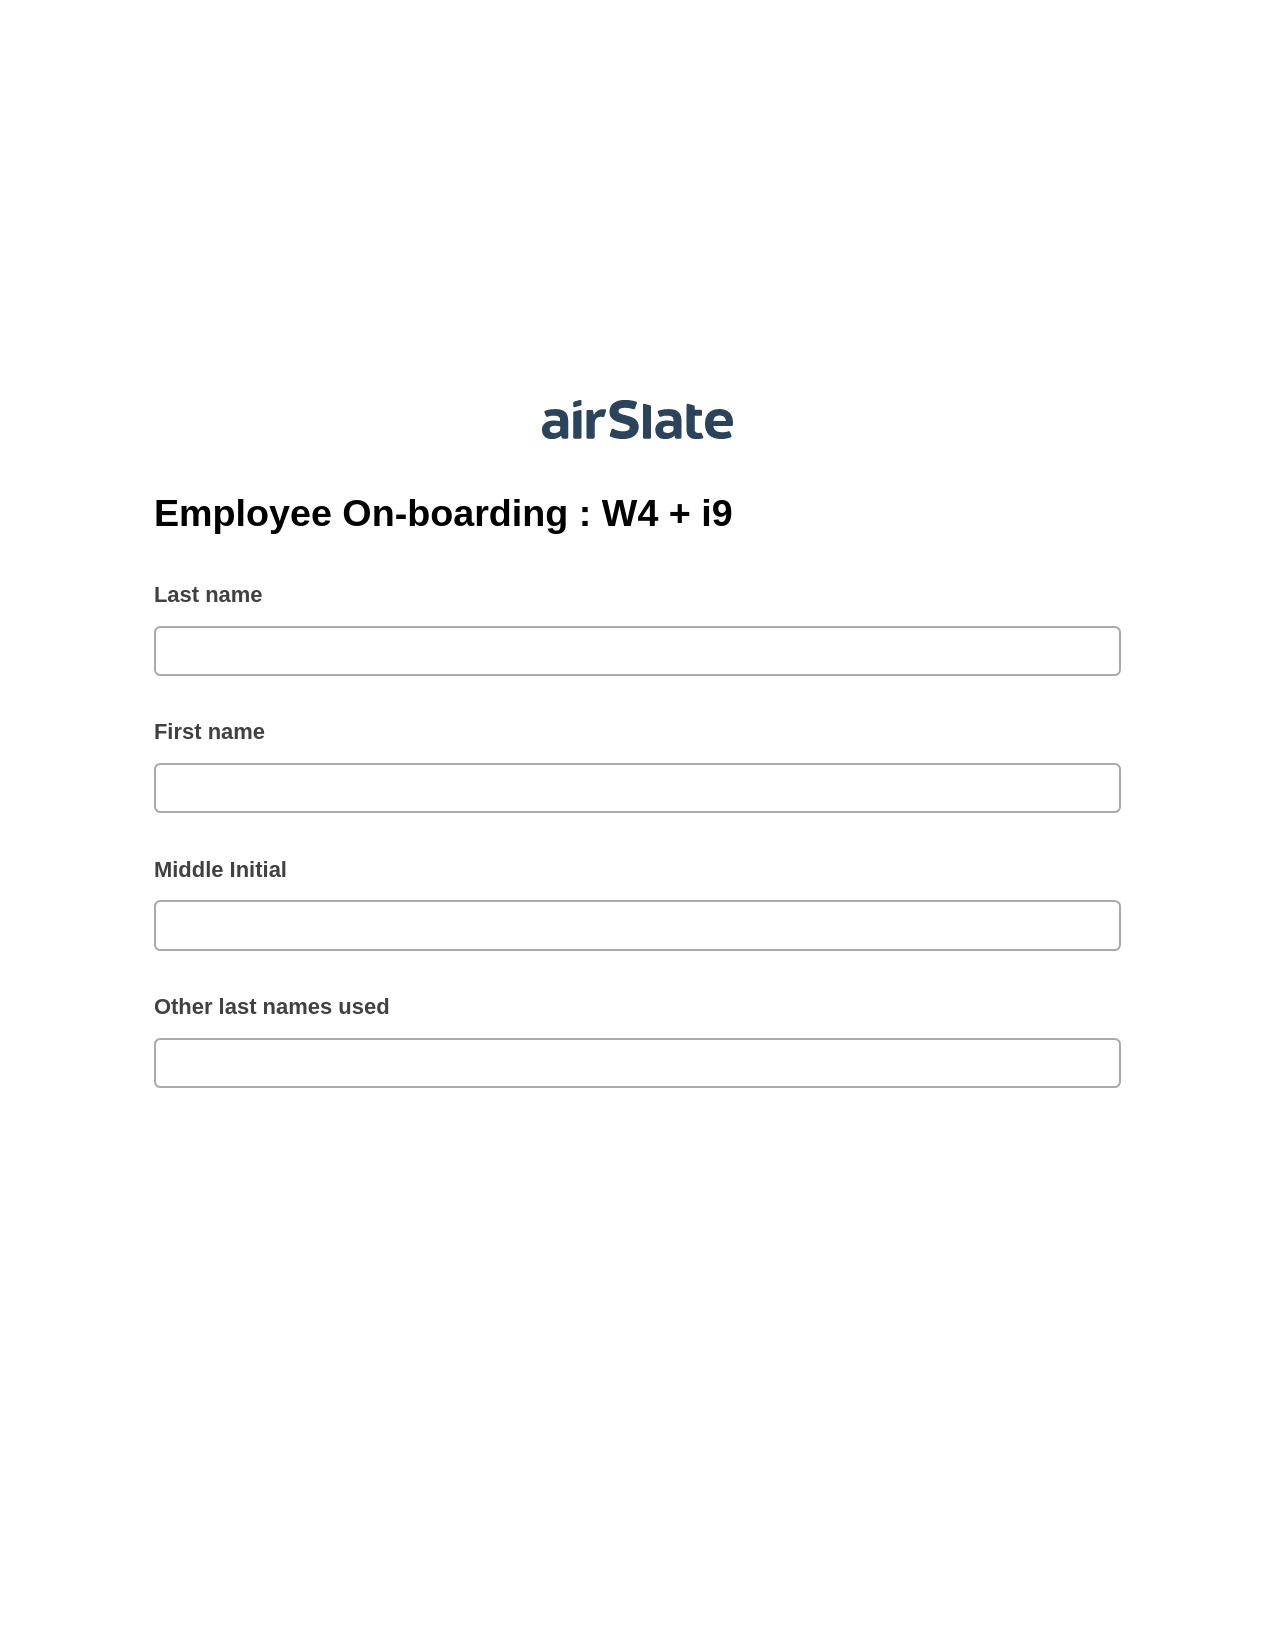 Multirole Employee On-boarding : W4 + i9 Pre-fill from Salesforce Records via SOQL Bot, Assign Slate Name Bot, Export to Google Sheet Bot